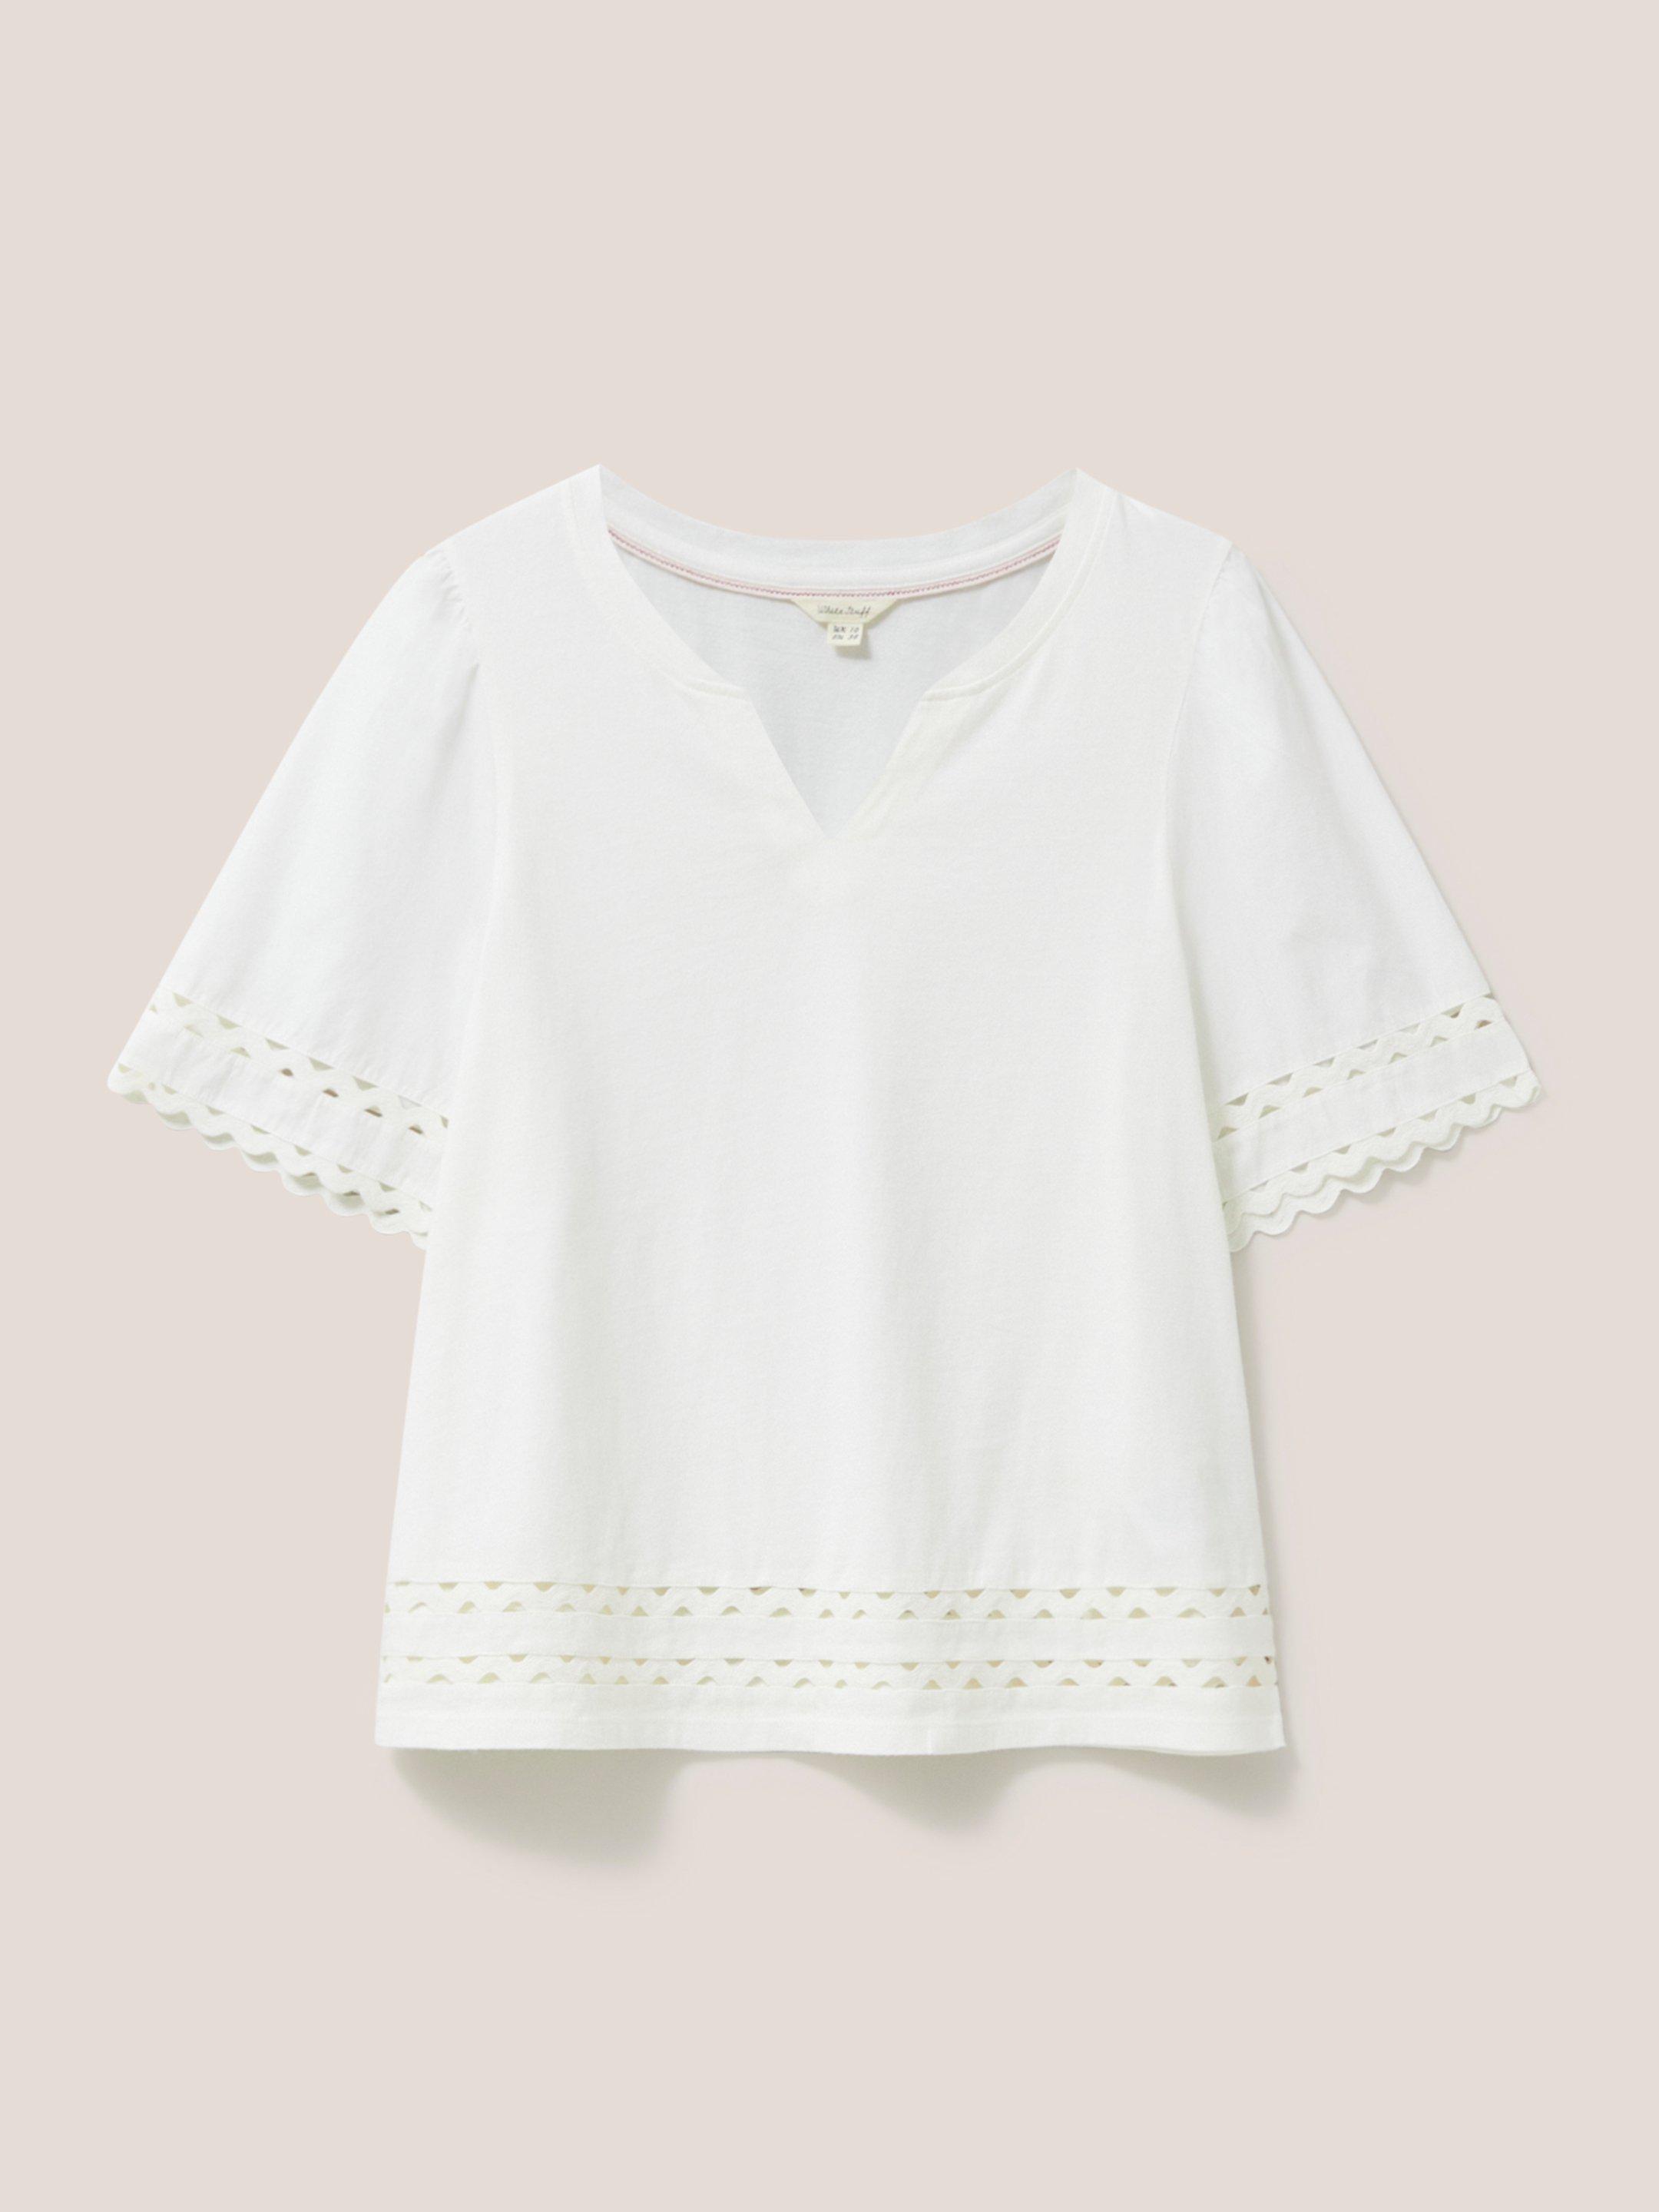 SAGE TRIM TOP in PALE IVORY - FLAT FRONT